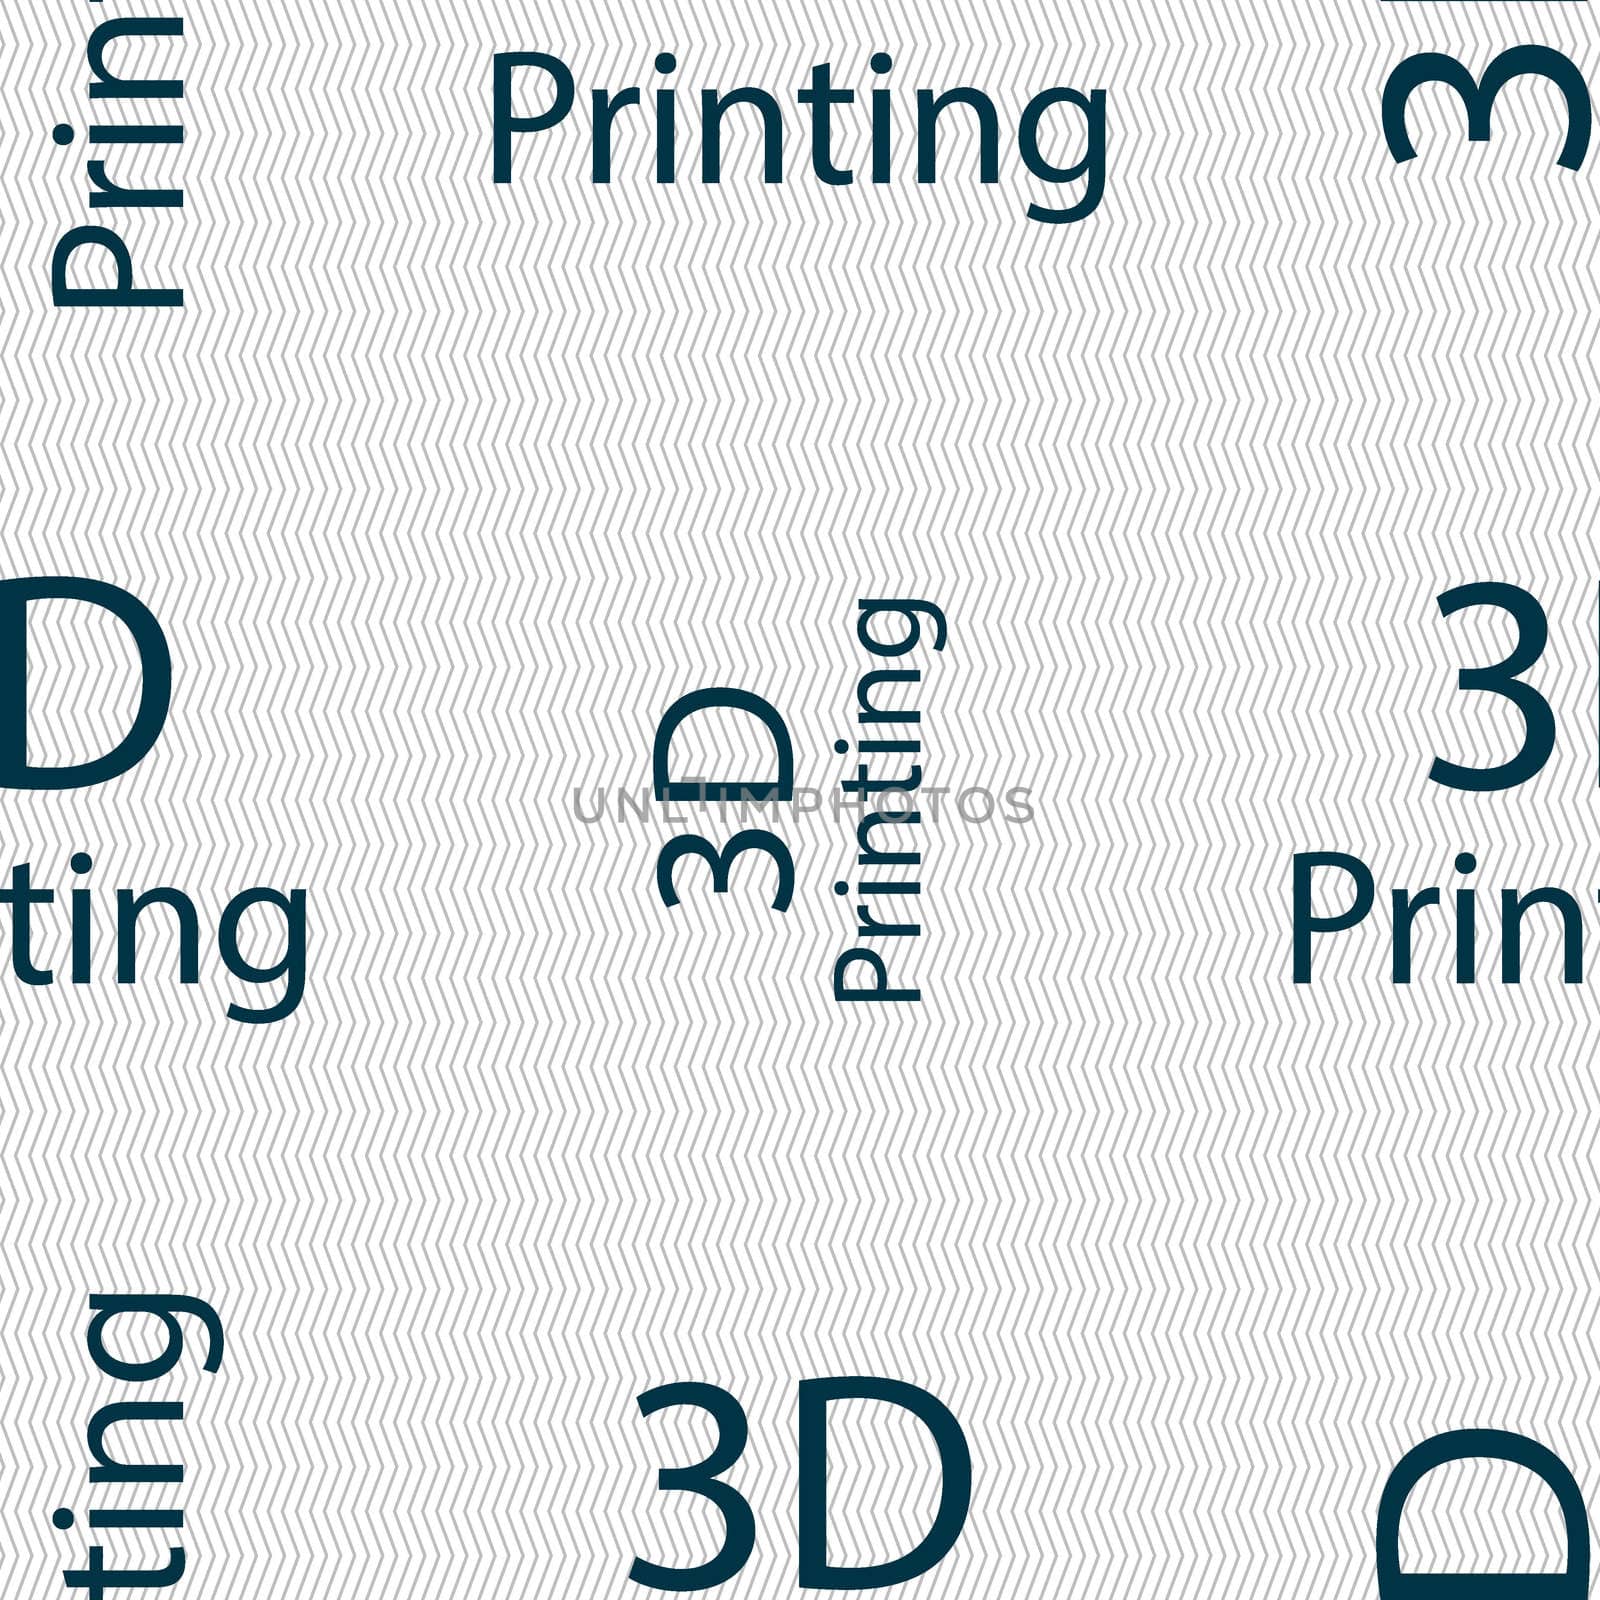 3D Print sign icon. 3d-Printing symbol. Seamless abstract background with geometric shapes.  by serhii_lohvyniuk